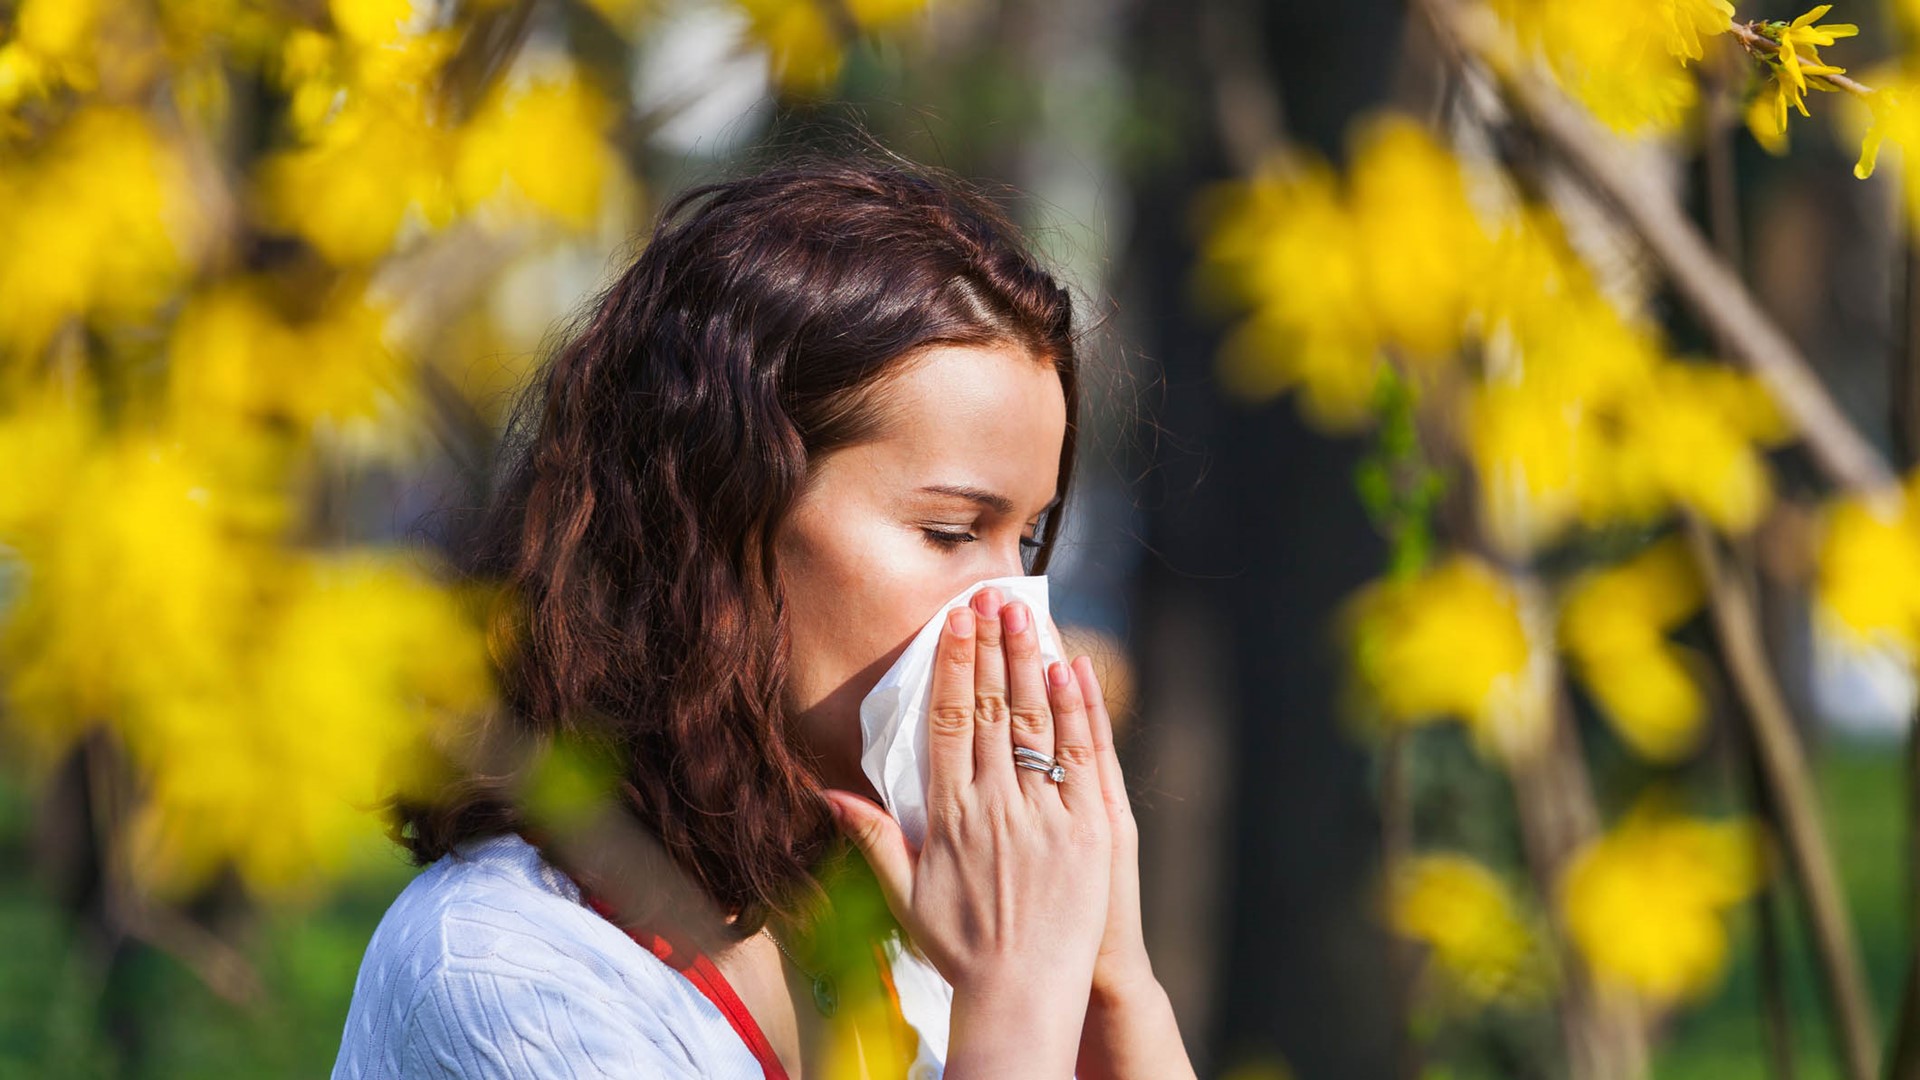 There's no denying pollen is in the air and covering surfaces with a yellow dust. Here's the latest on the season that allergy sufferers dread.